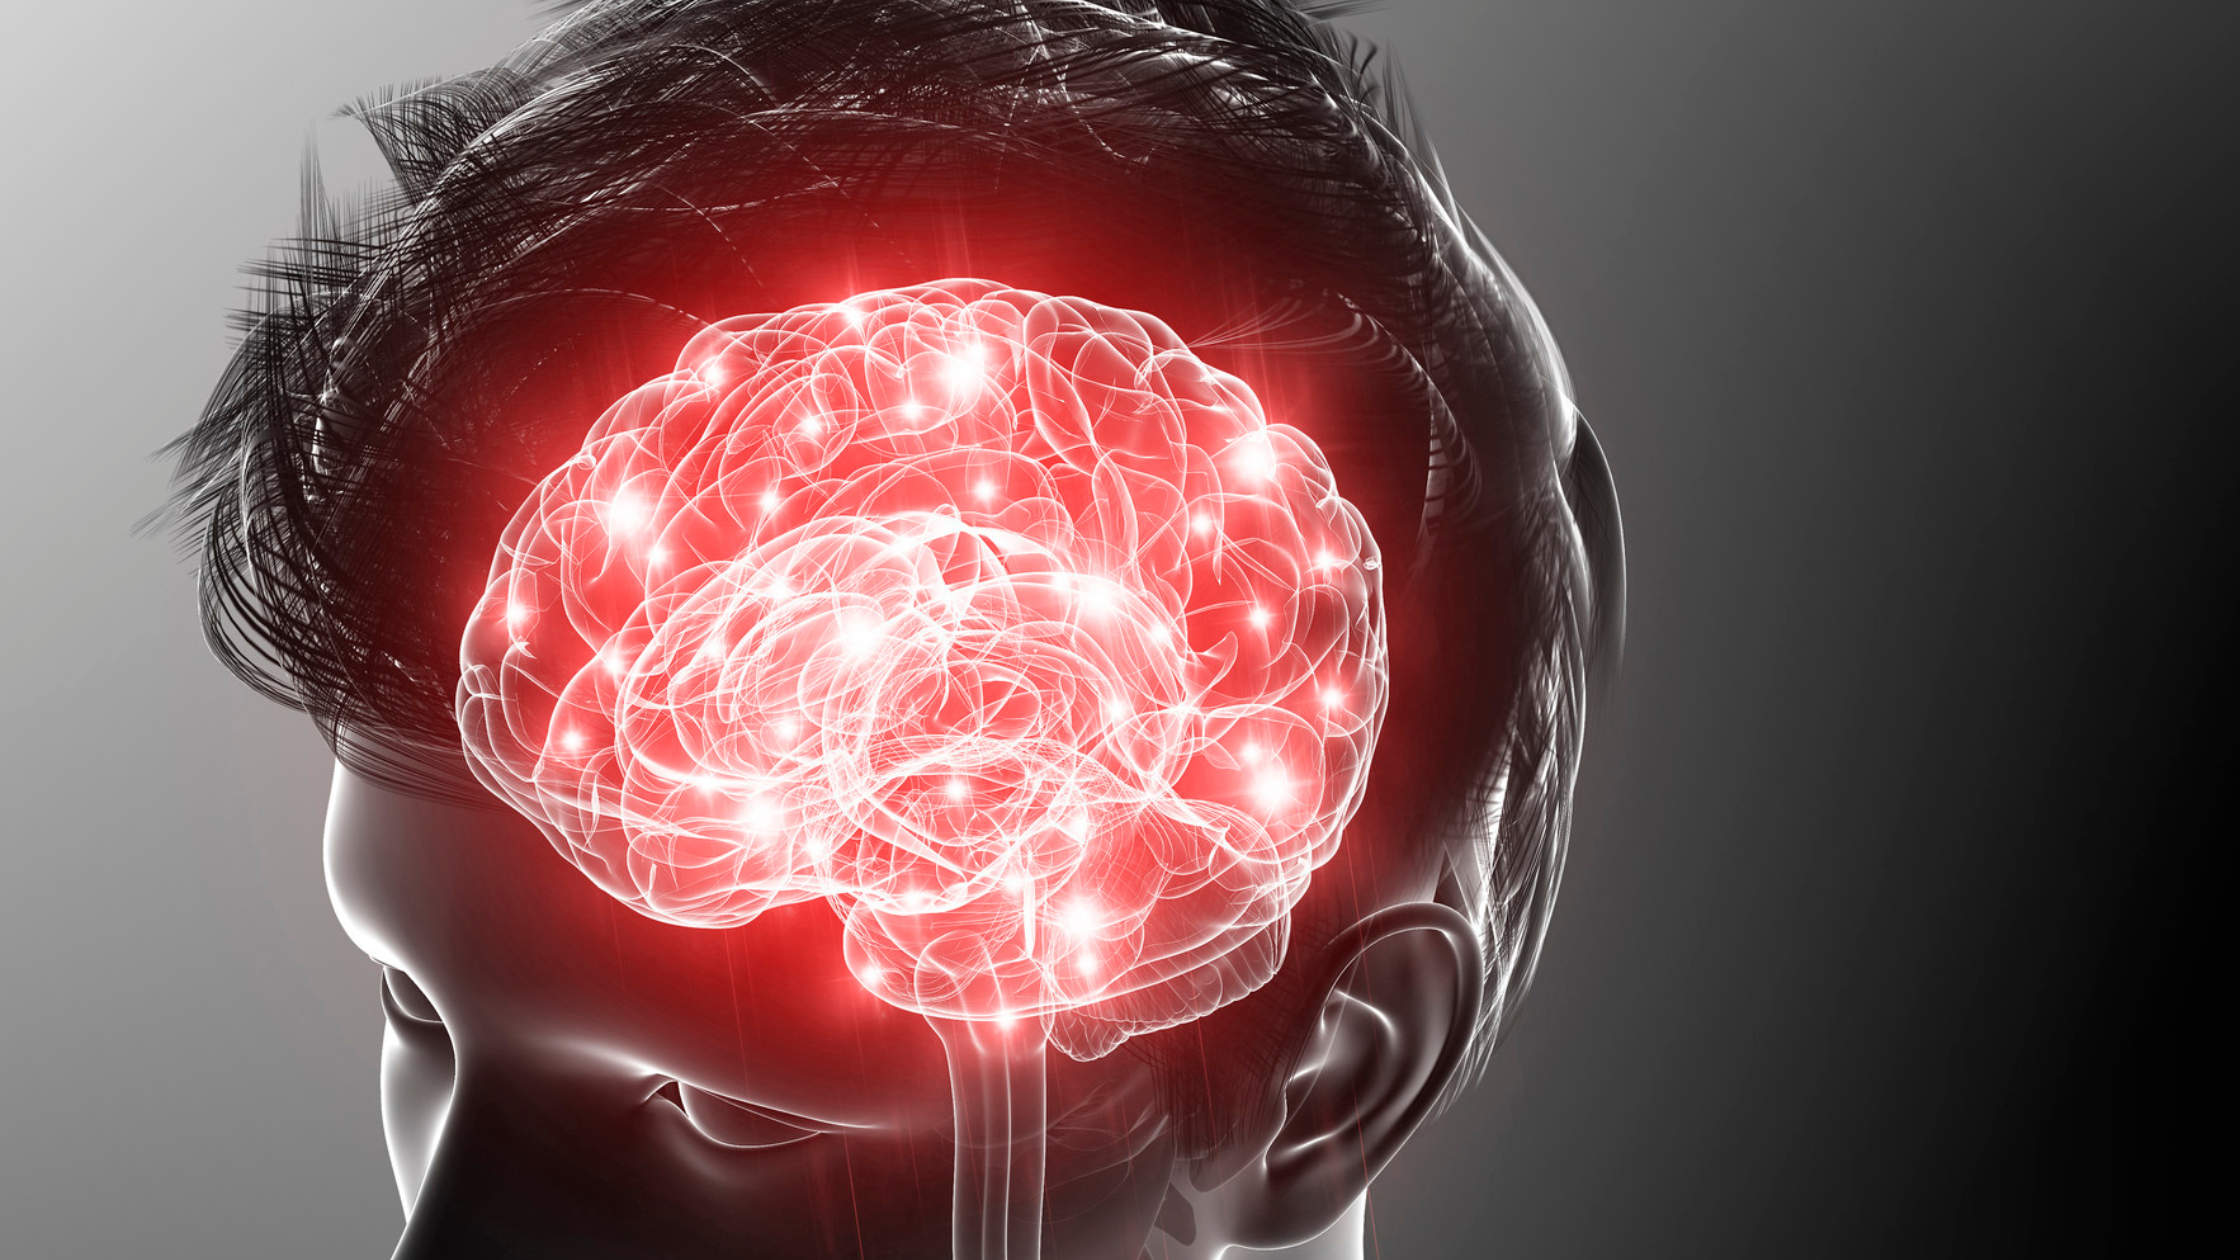 animated of an adult human head with the brain glowing through in red and white lighted neurons